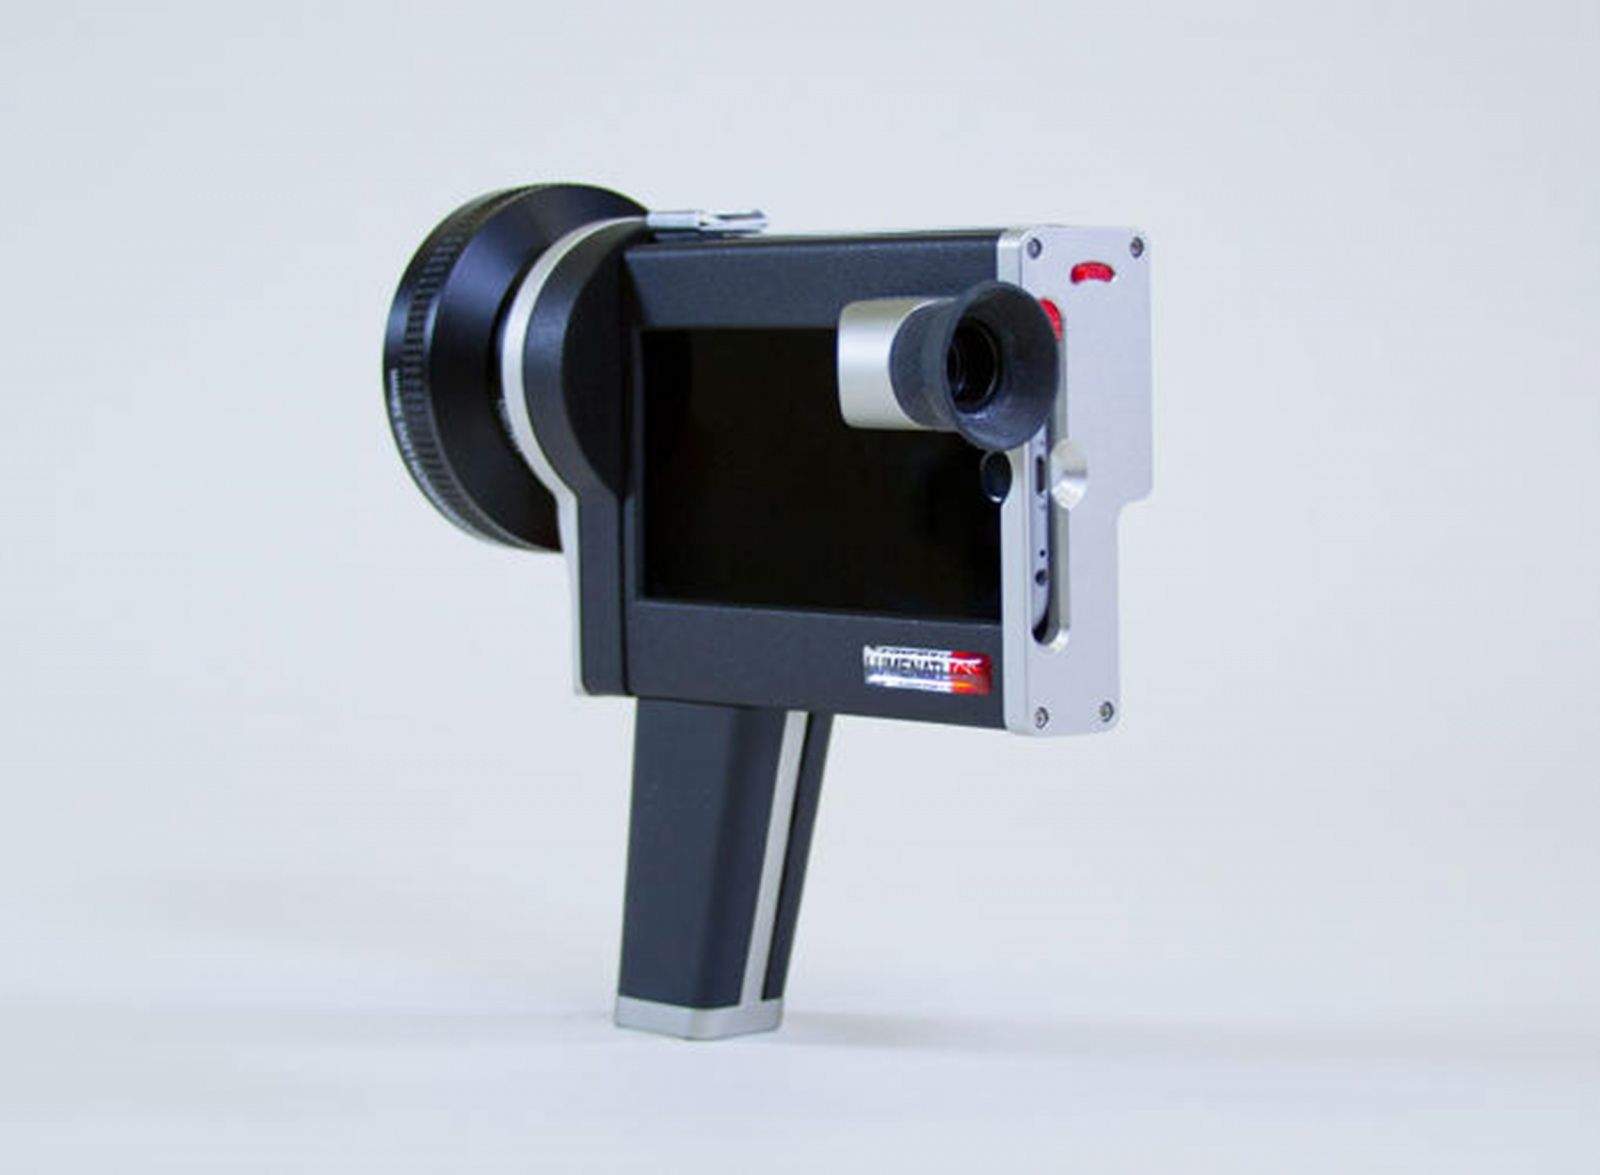 The Luminati CS1 is a case for the iPhone 6 that brings the design practicality of a Super 8 movie camera to your filmmaking.